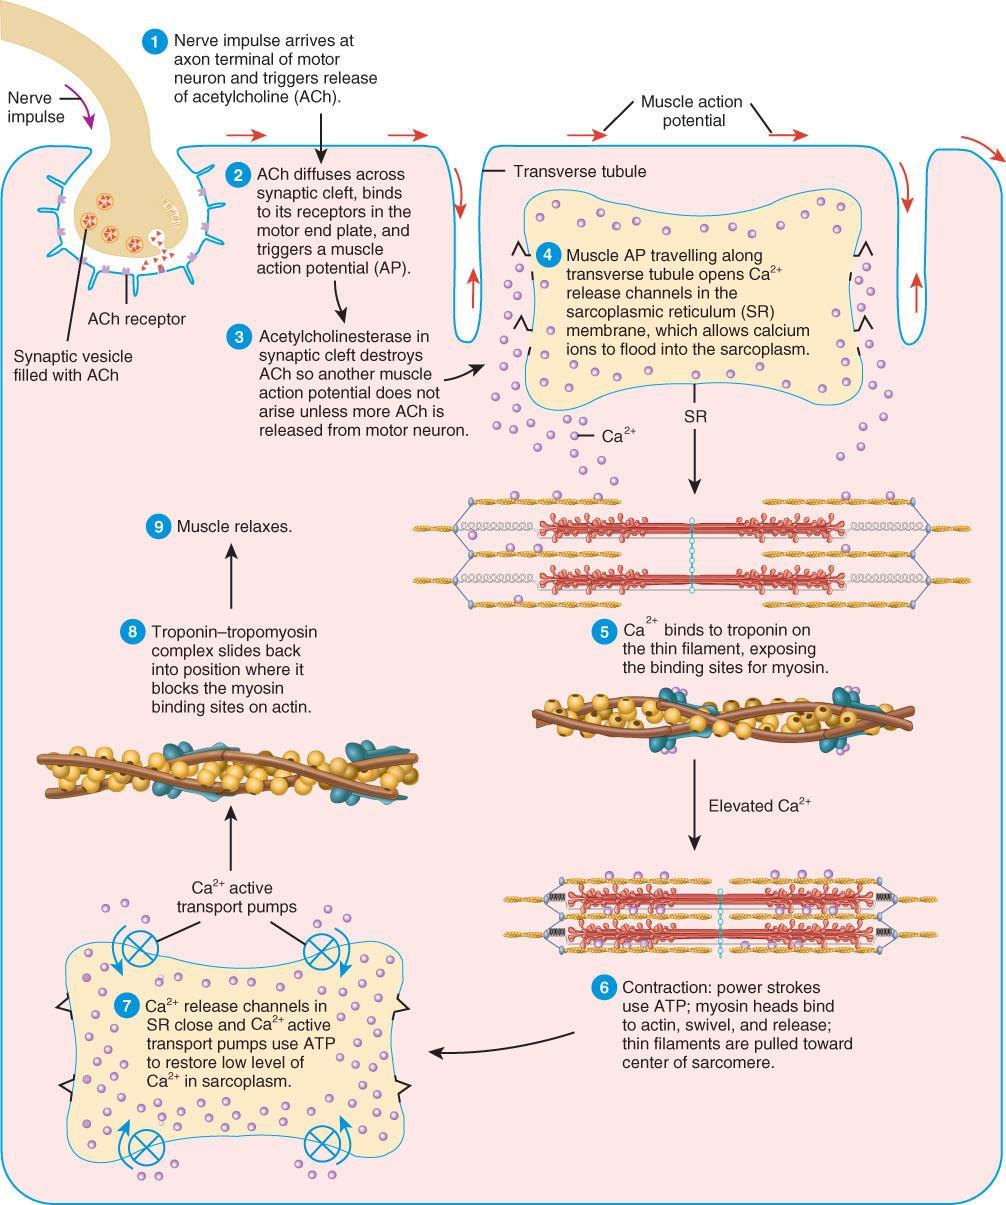 MUSCLE CONTRACTION OVERVIEW Basic steps: 1. Release of ACh in response to AP 2. Initiation of muscle AP results in release of Ca+2 from SR 3. Ca+2 interacts with troponin on thin filament.